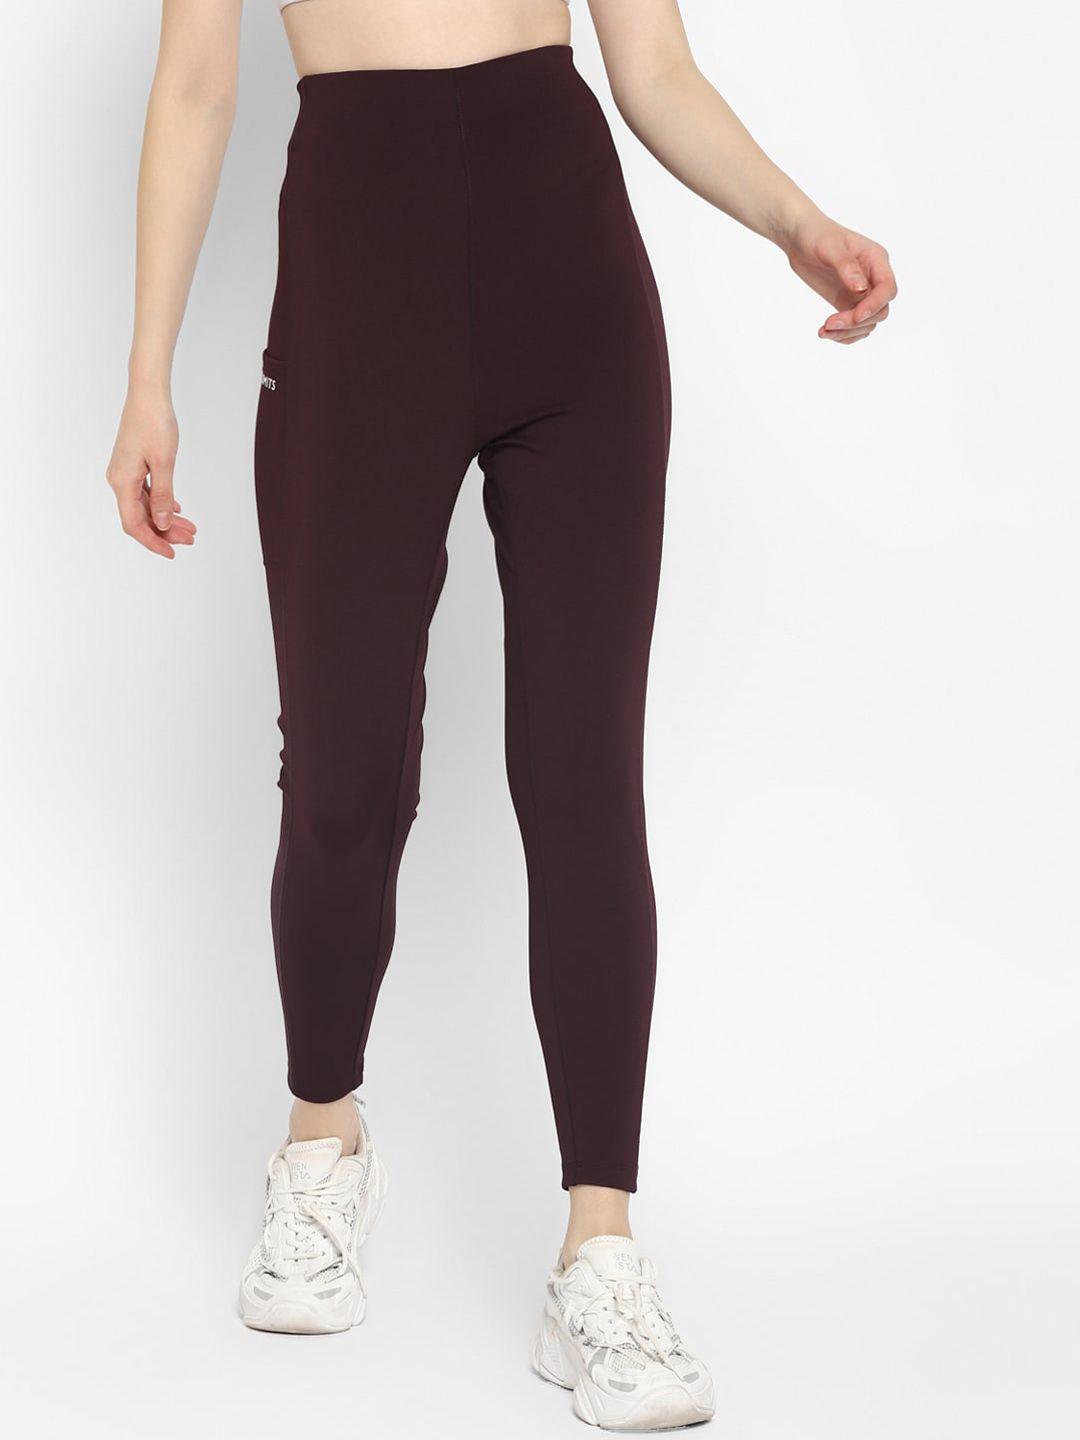 off-limits-women-maroon-solid-tights